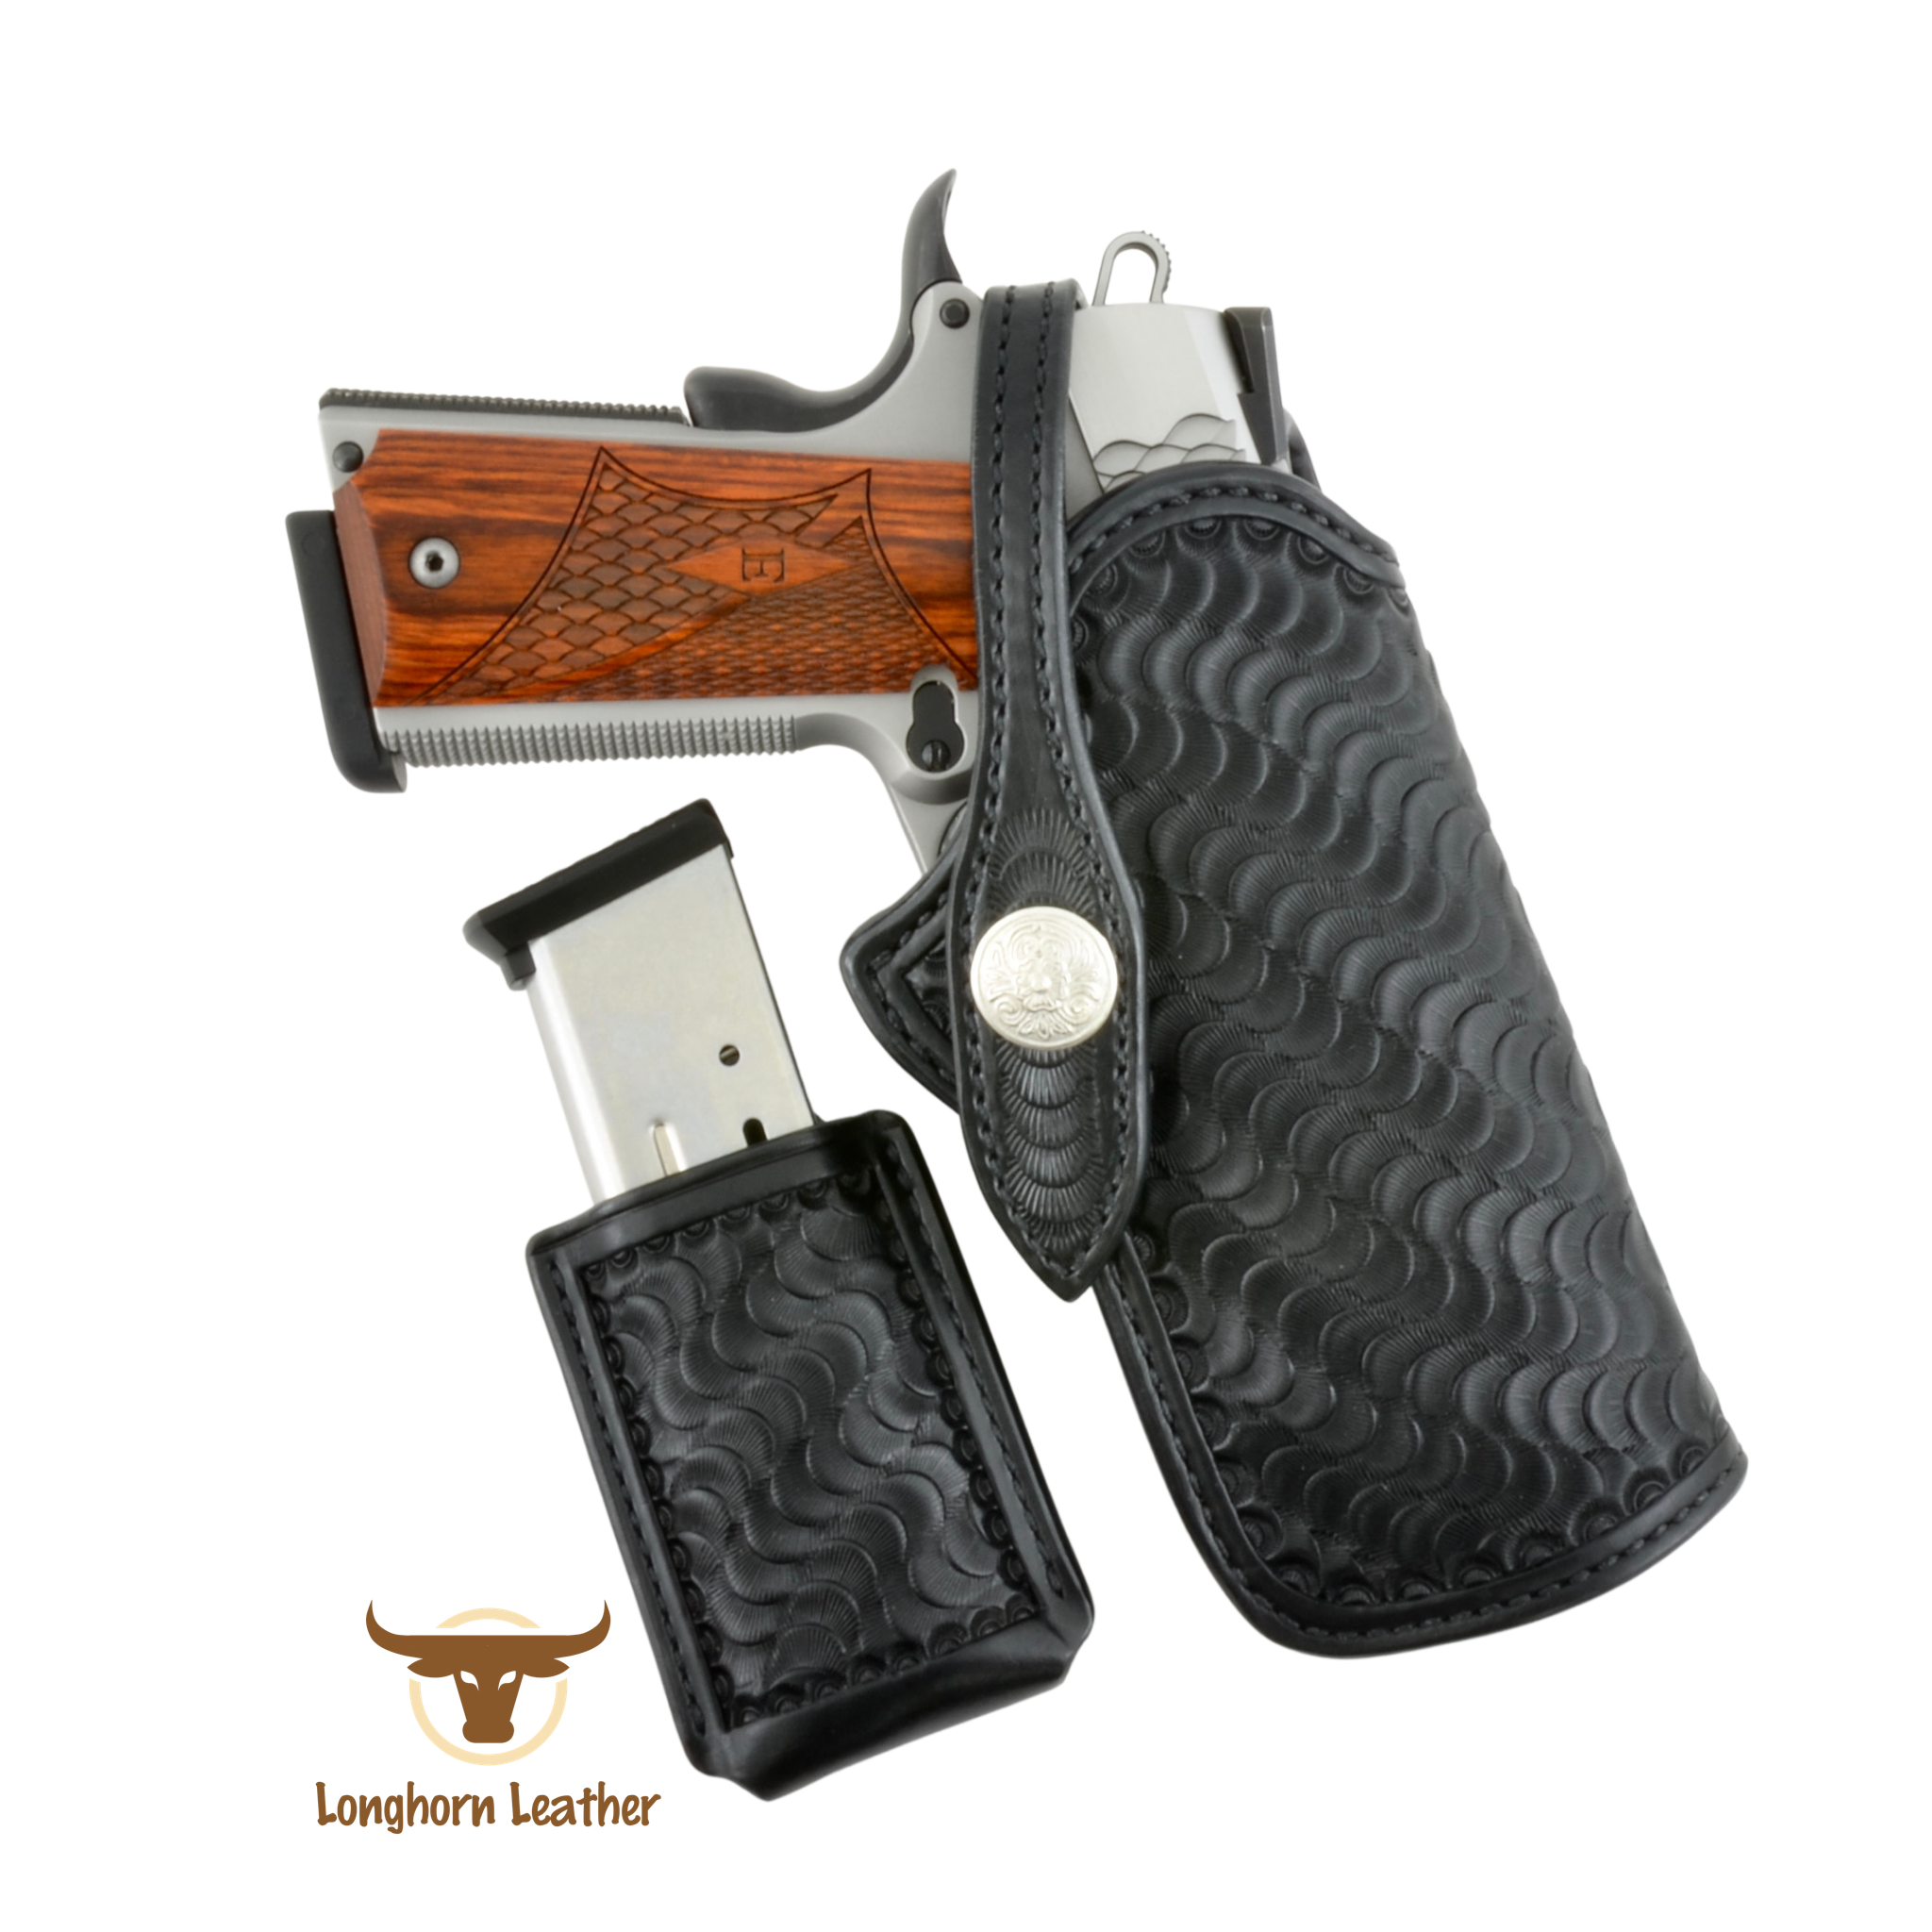 Custom leather 1911 holster and magazine carrier featuring the “Scottsdale” design.  Individually handcrafted at Longhorn Leather AZ